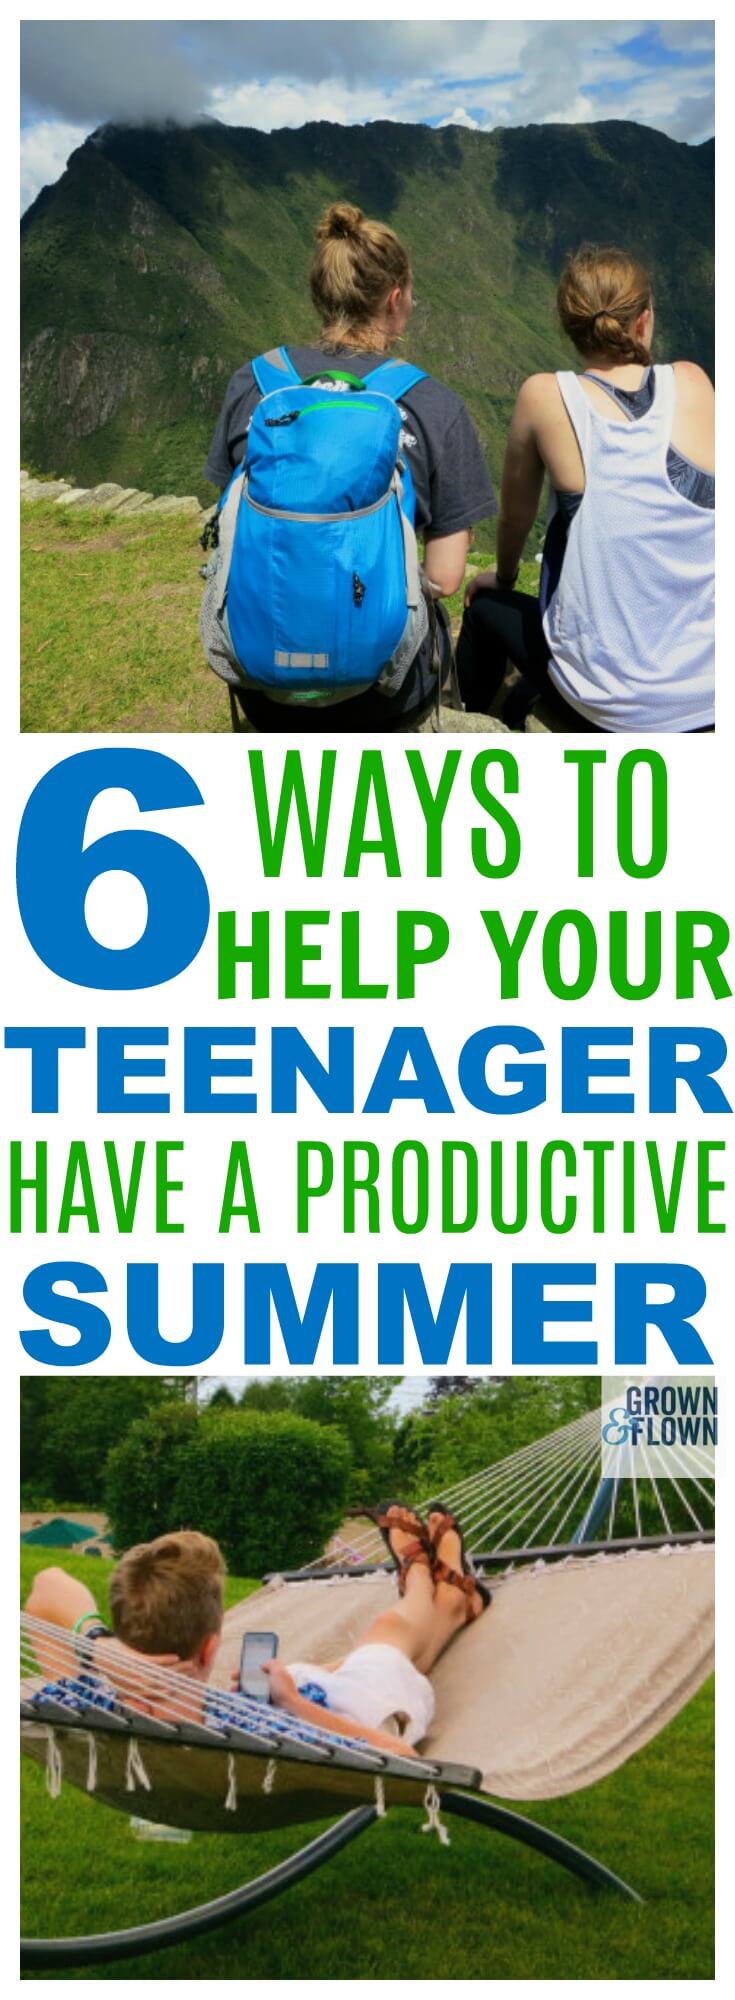 Summer for teens doesn't have to be all about finding summer jobs. The summer time can actually be a really great time for your teen to accomplish a lot of really great things that will prepare them for life. Here are 6 ideas of things your teenagers can do this summer aside from getting a summer job. #summer #teens #teenagers #parentingteens #teen #highschool #summerjob #summerideasforteens #summerkidideas